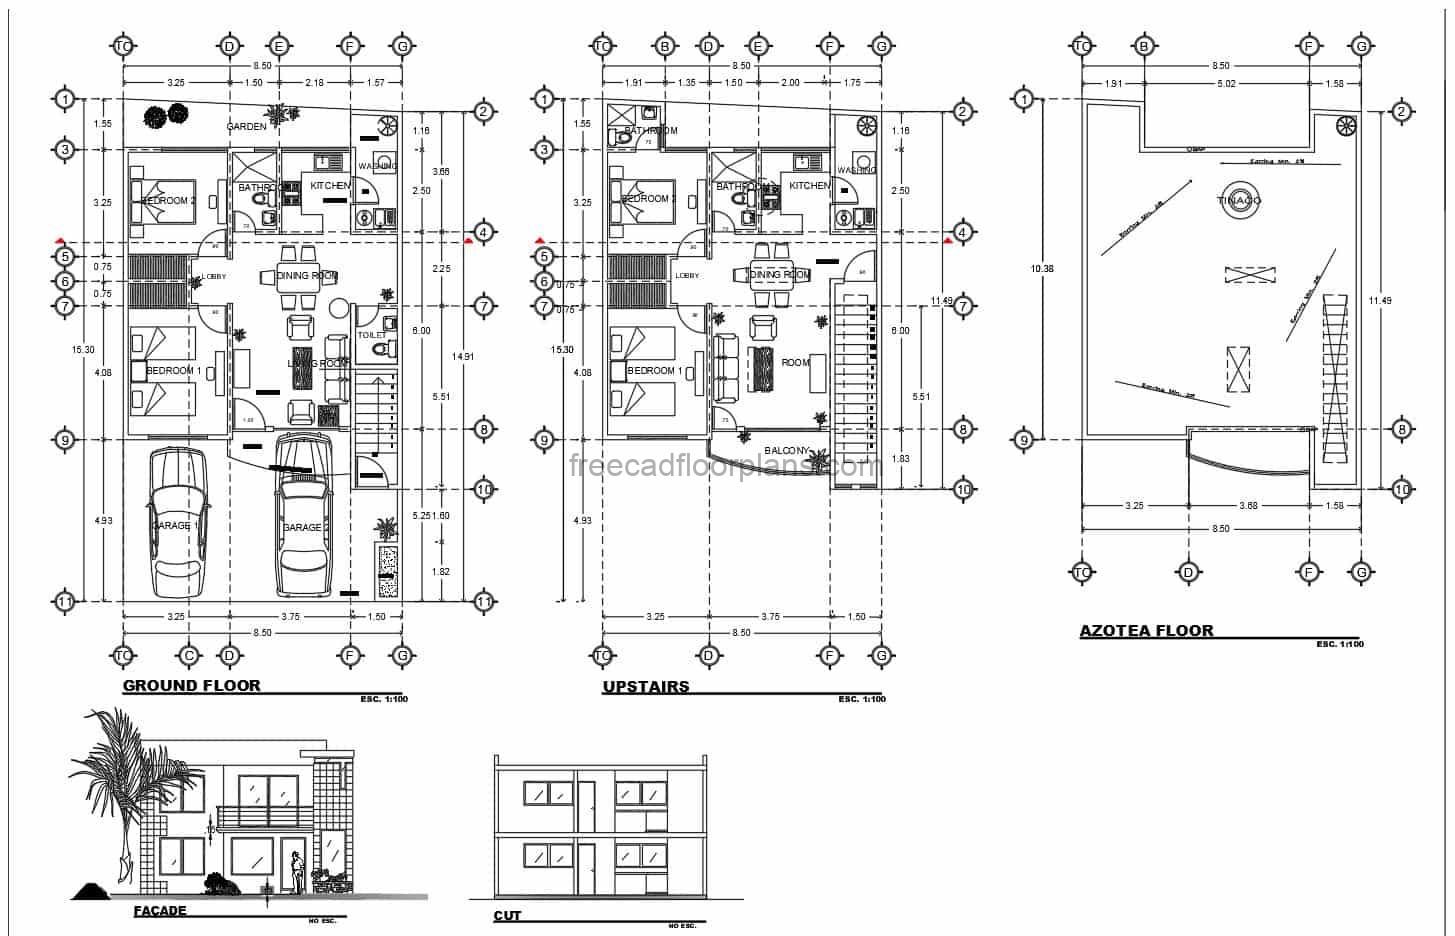 Architectural and dimensional plans in DWG AutoCAD format of a two level residence with four bedrooms, each level has two bedrooms and can function as independent houses. Plans with dimensions and blocks for free download in DWG format.